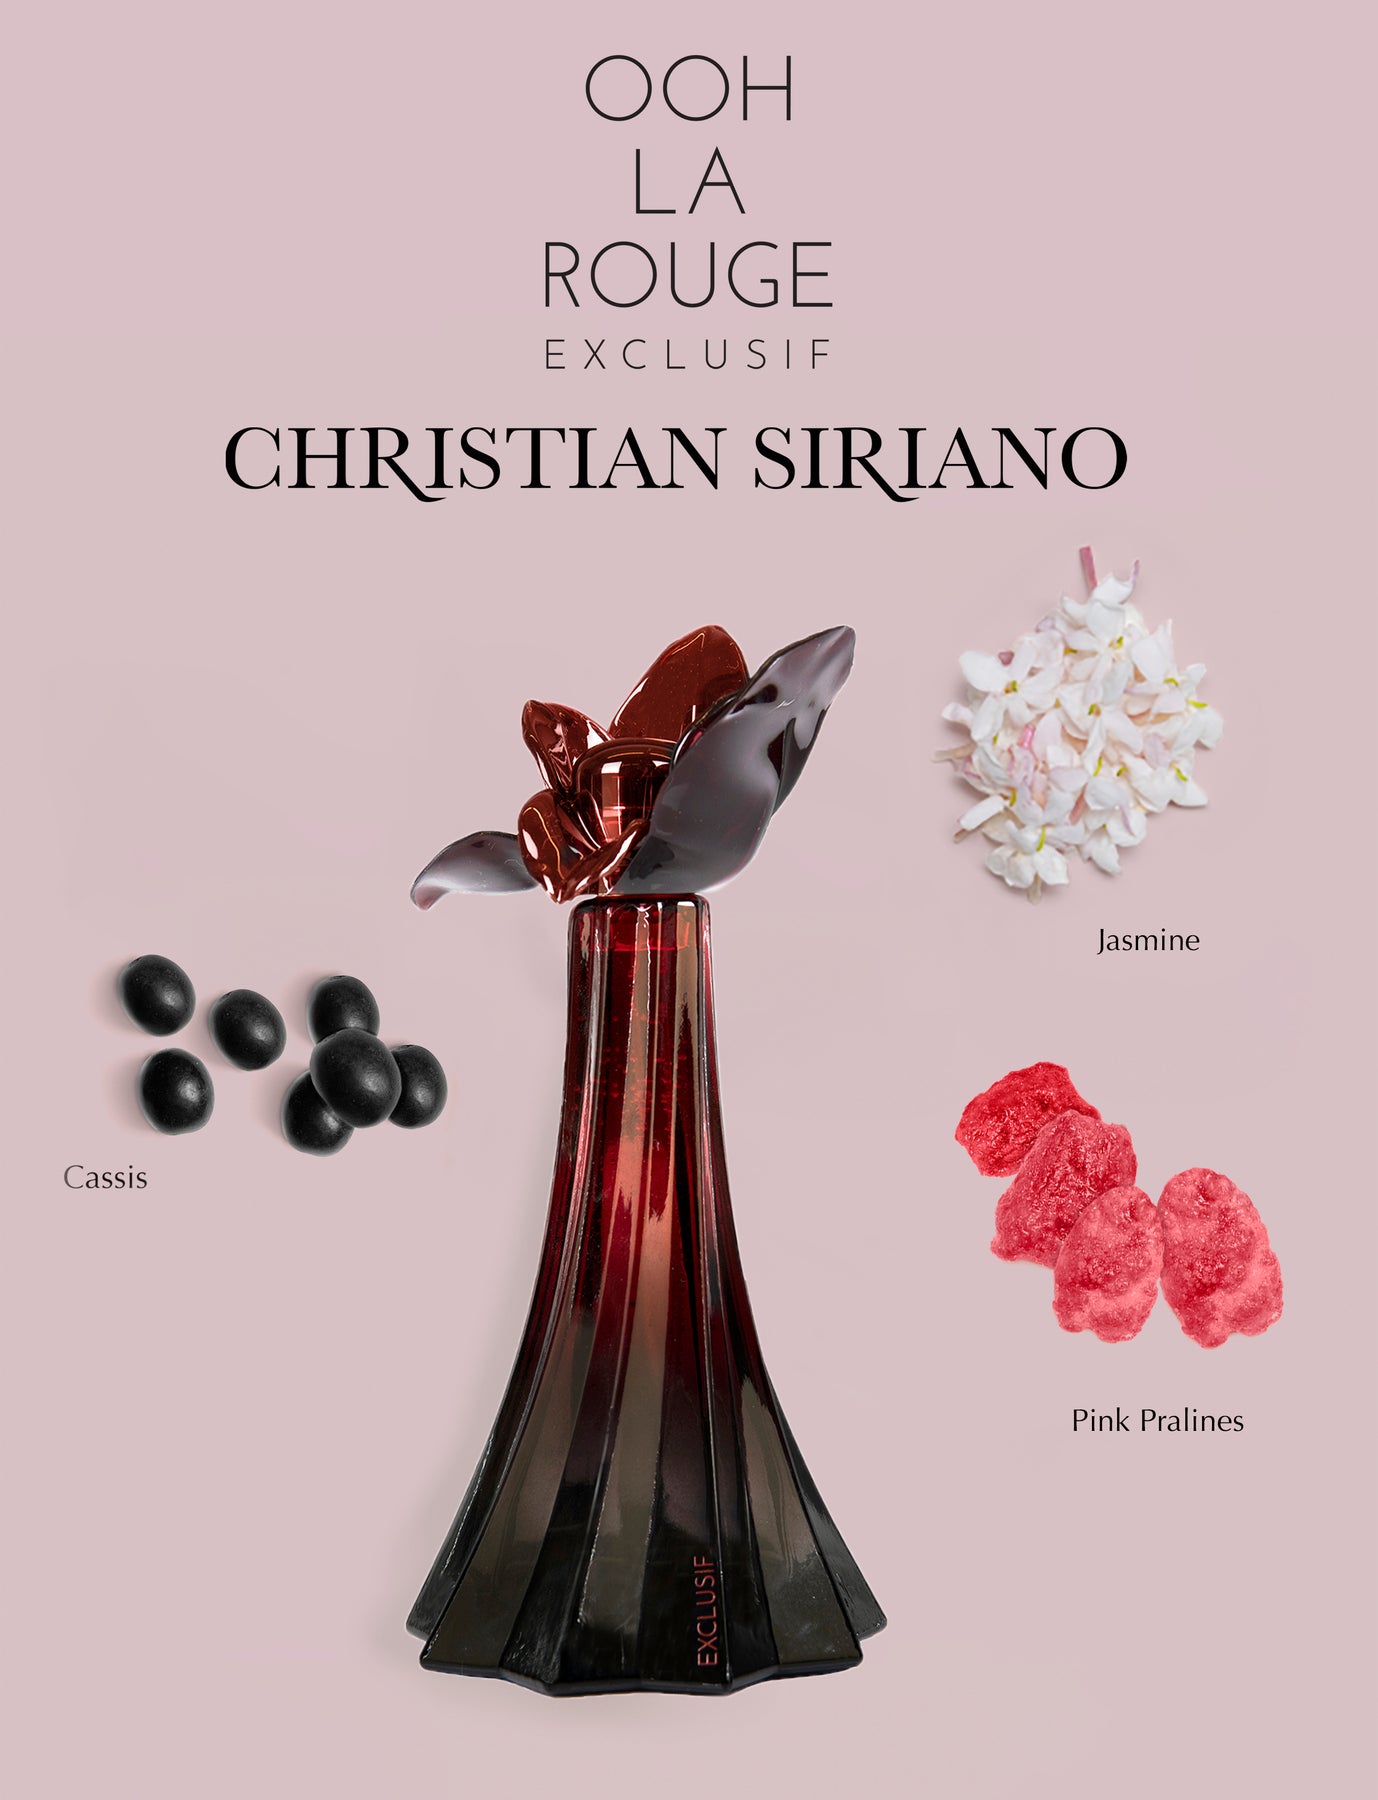 Christian Siriano Ooh La Rouge Exclusif for $115.00